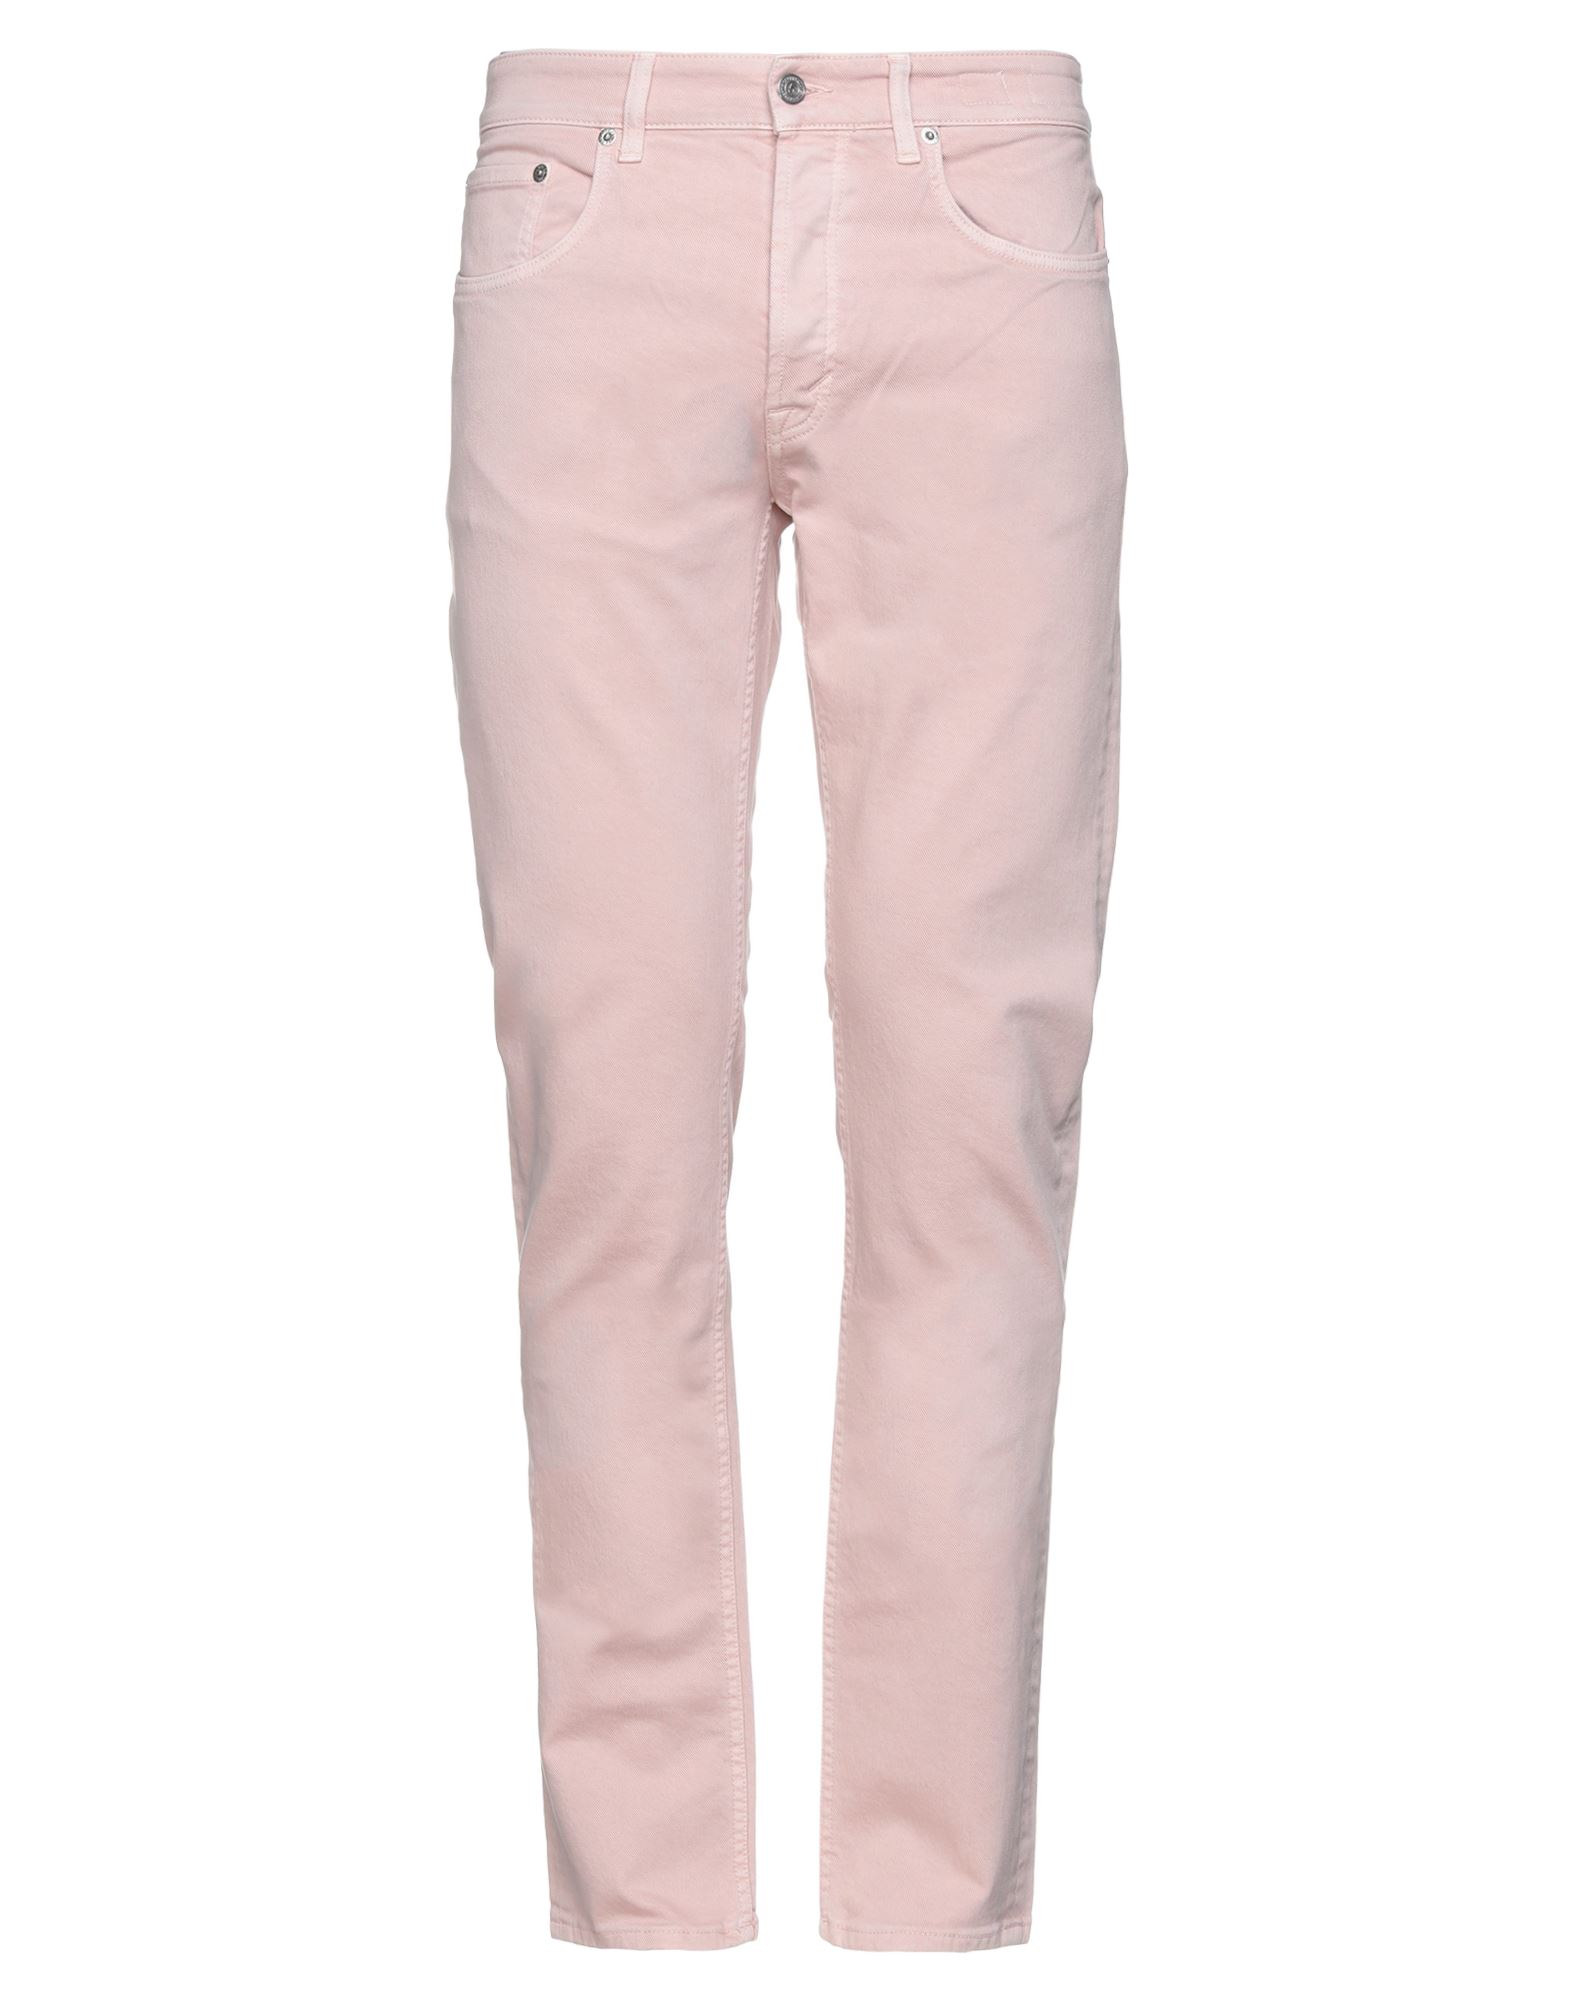 Department 5 Jeans In Light Pink